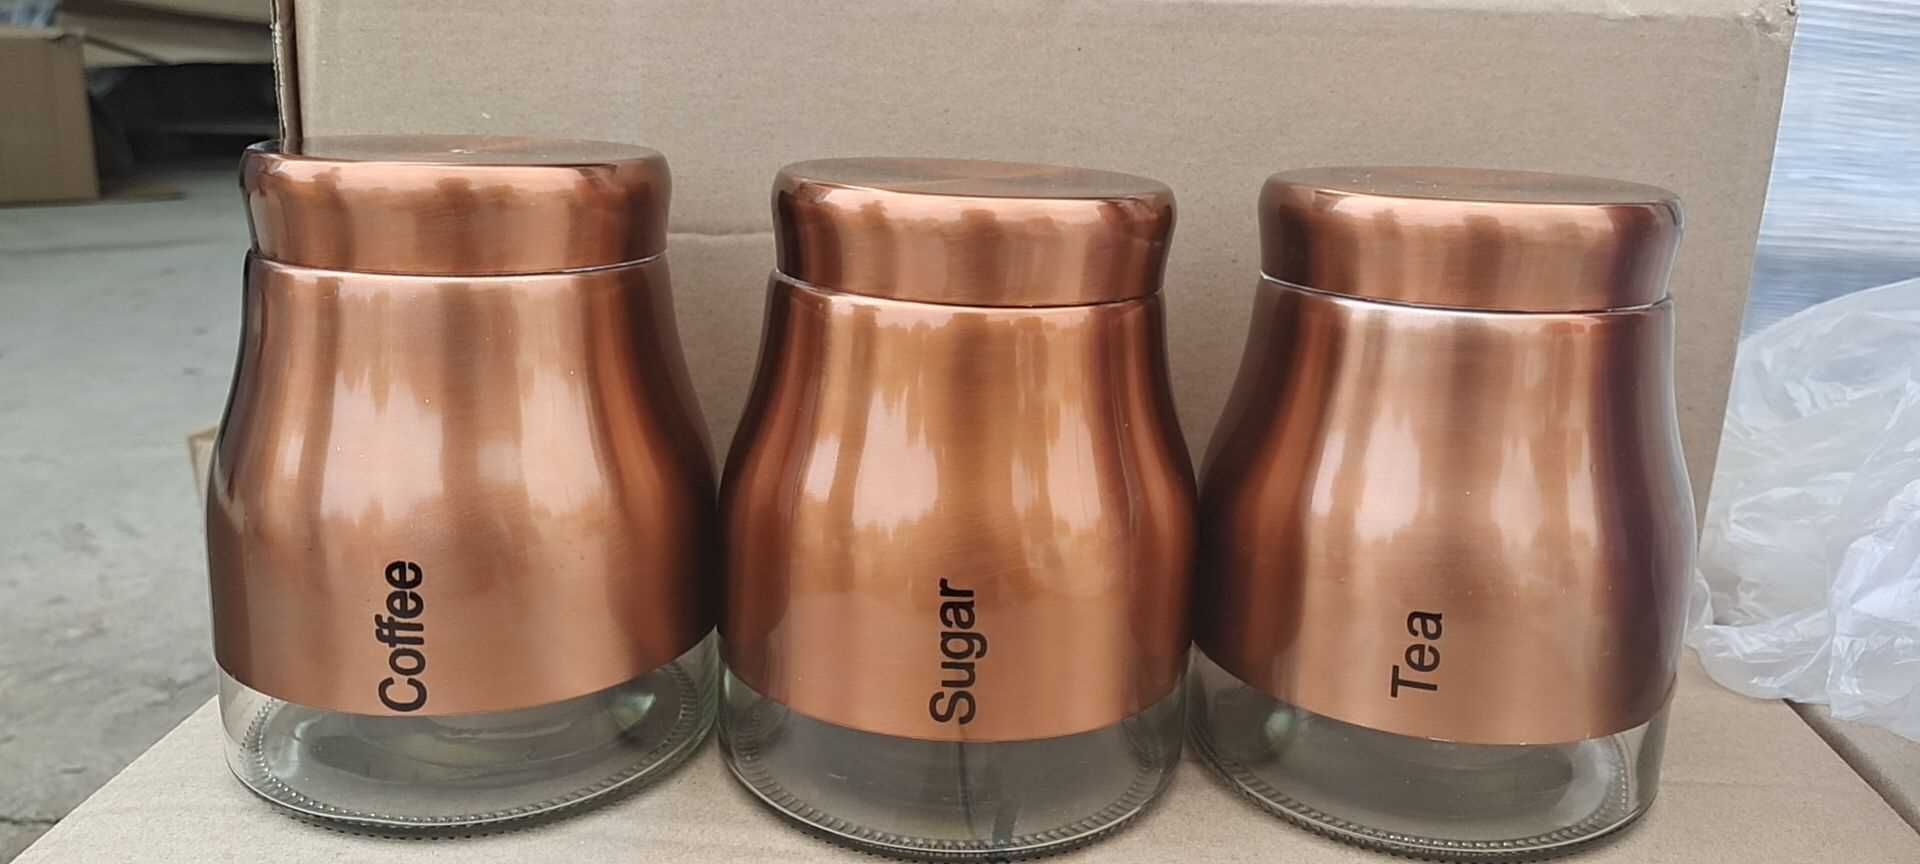 Set Of 3 Bronze Storage Canisters Tea Coffee Sugar Jars Pots Food Containers